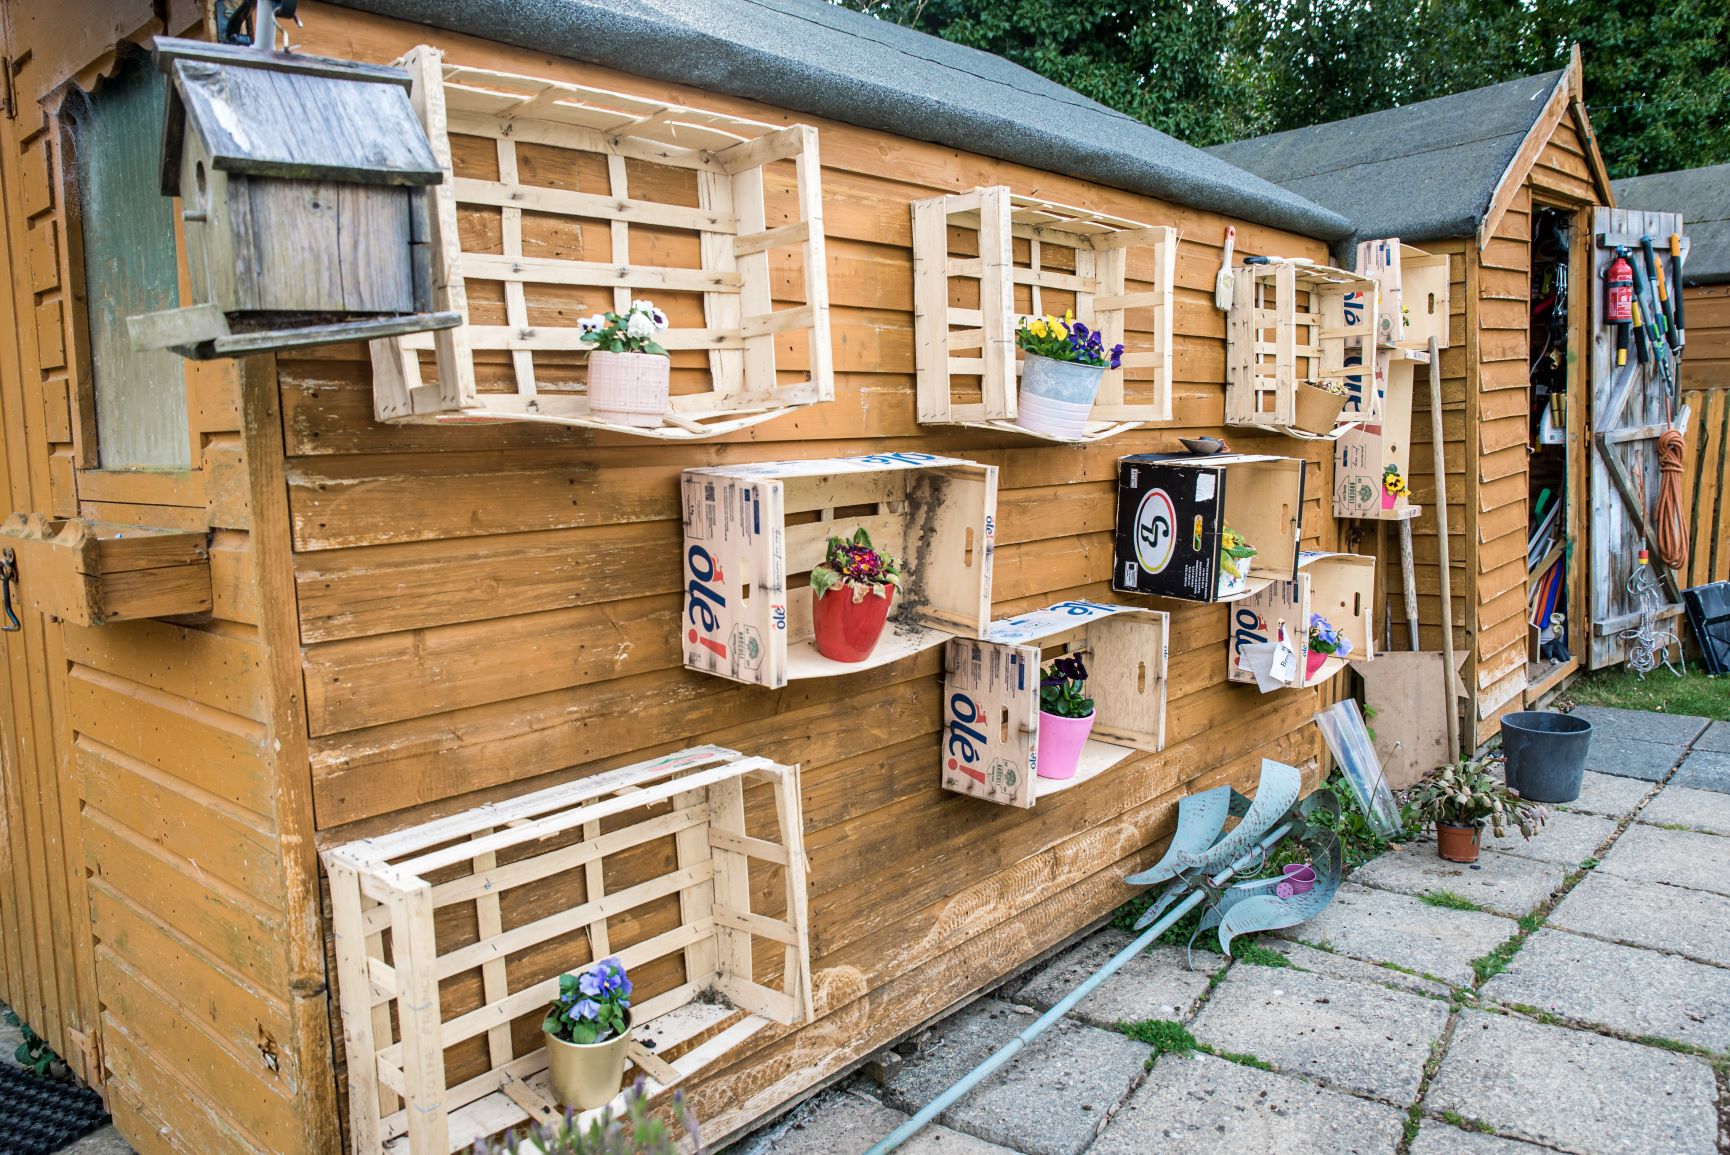 Several planter boxes line the wall of the garden shed filled with supplies for the staff and residents to enjoy the outdoors.